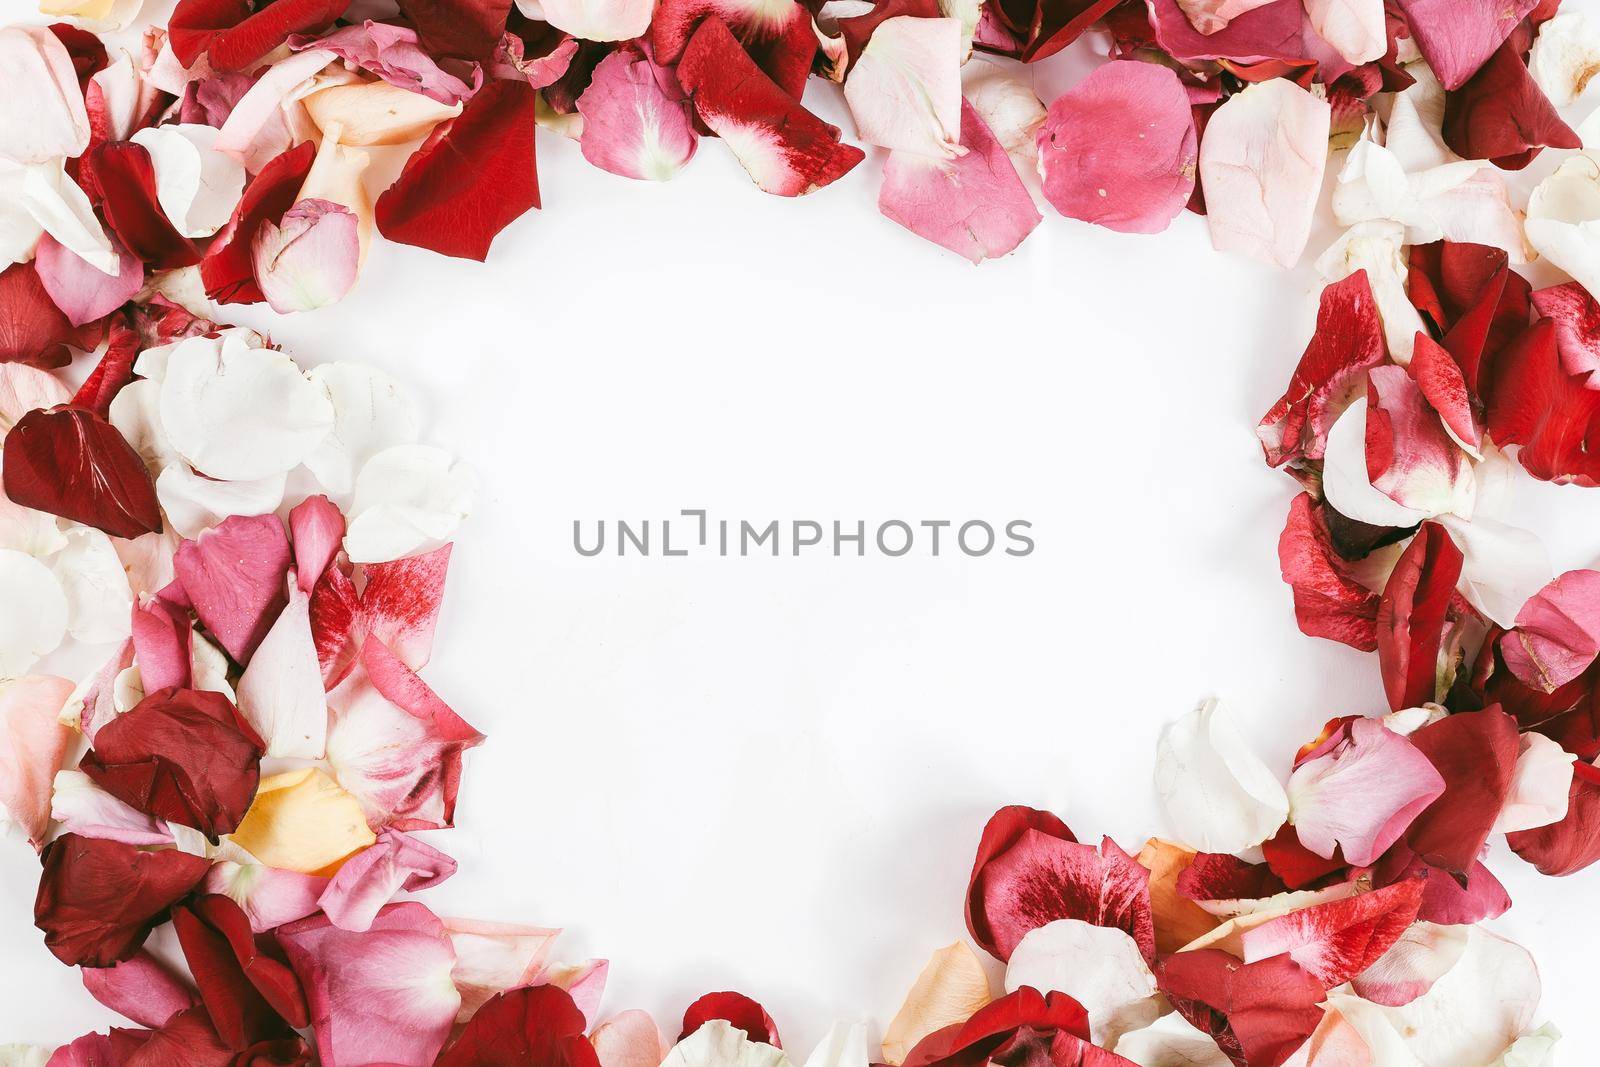 box with ring and rose petal frame on wooden background. photo with copy space